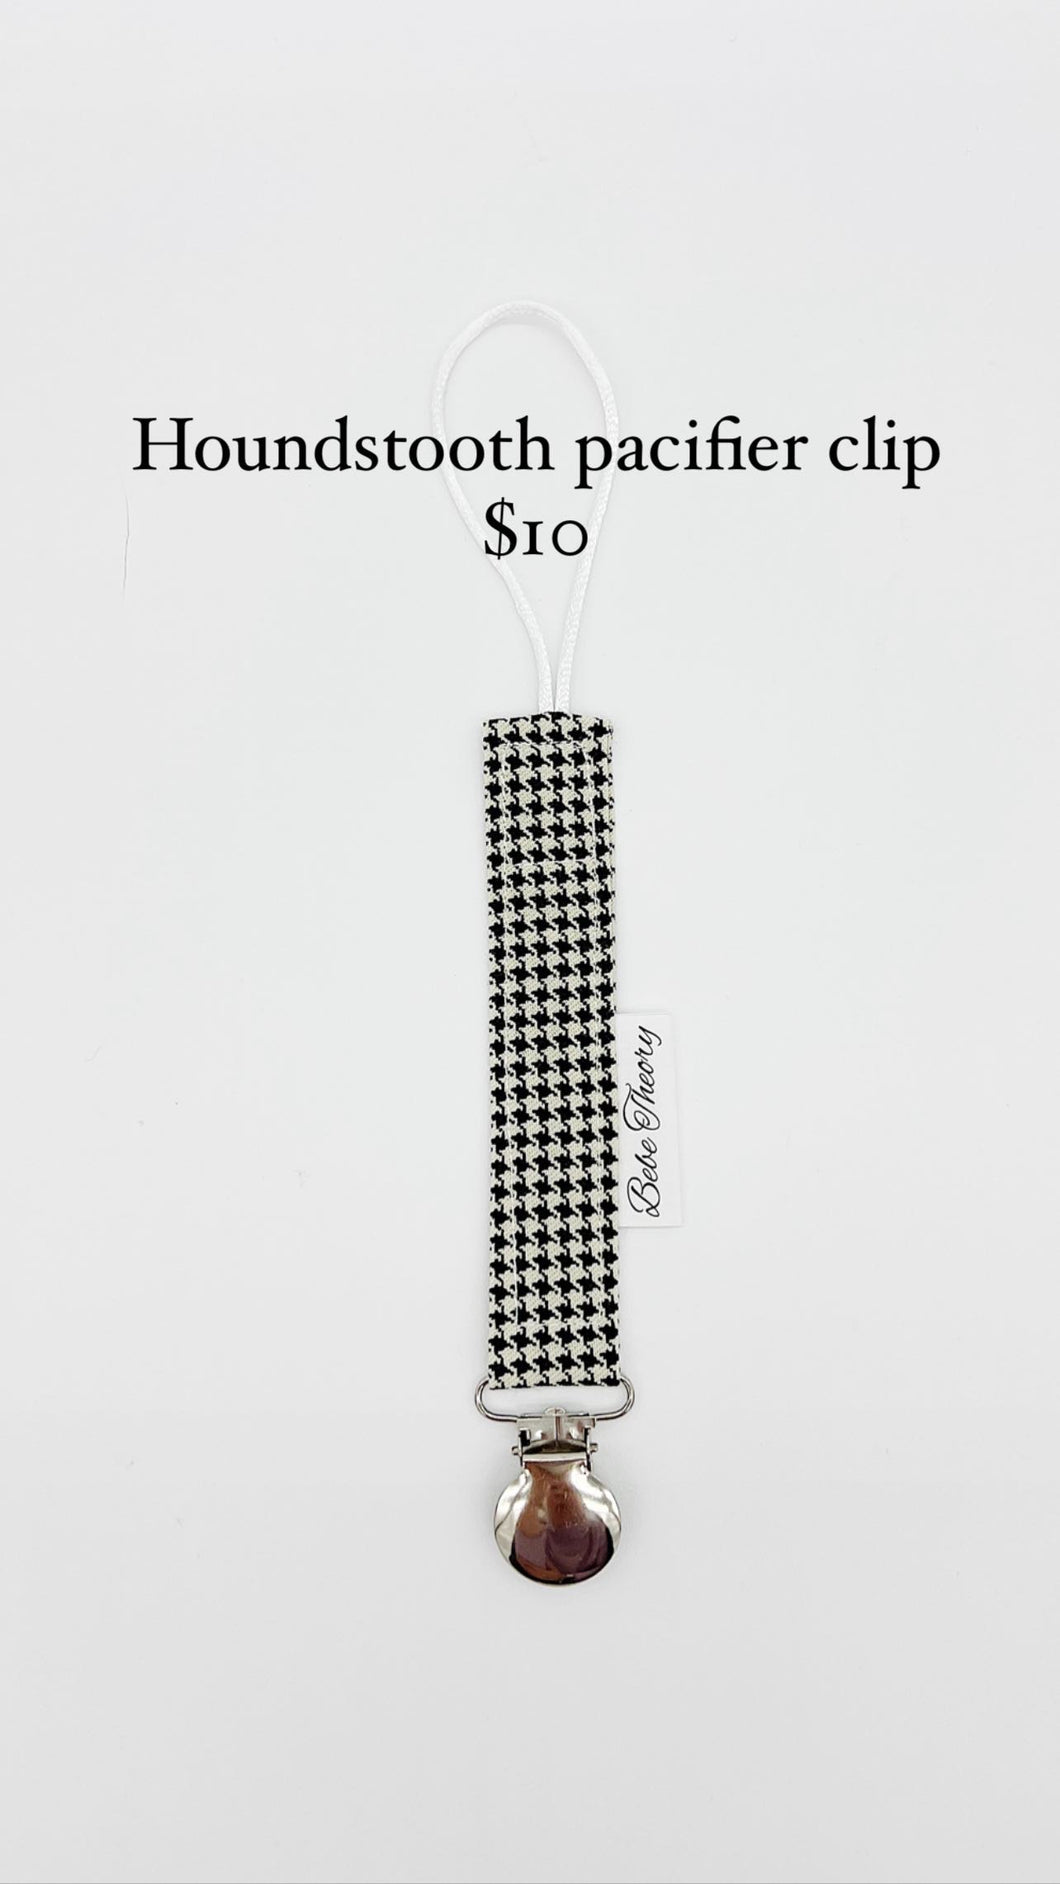 Houndstooth pacifier clip